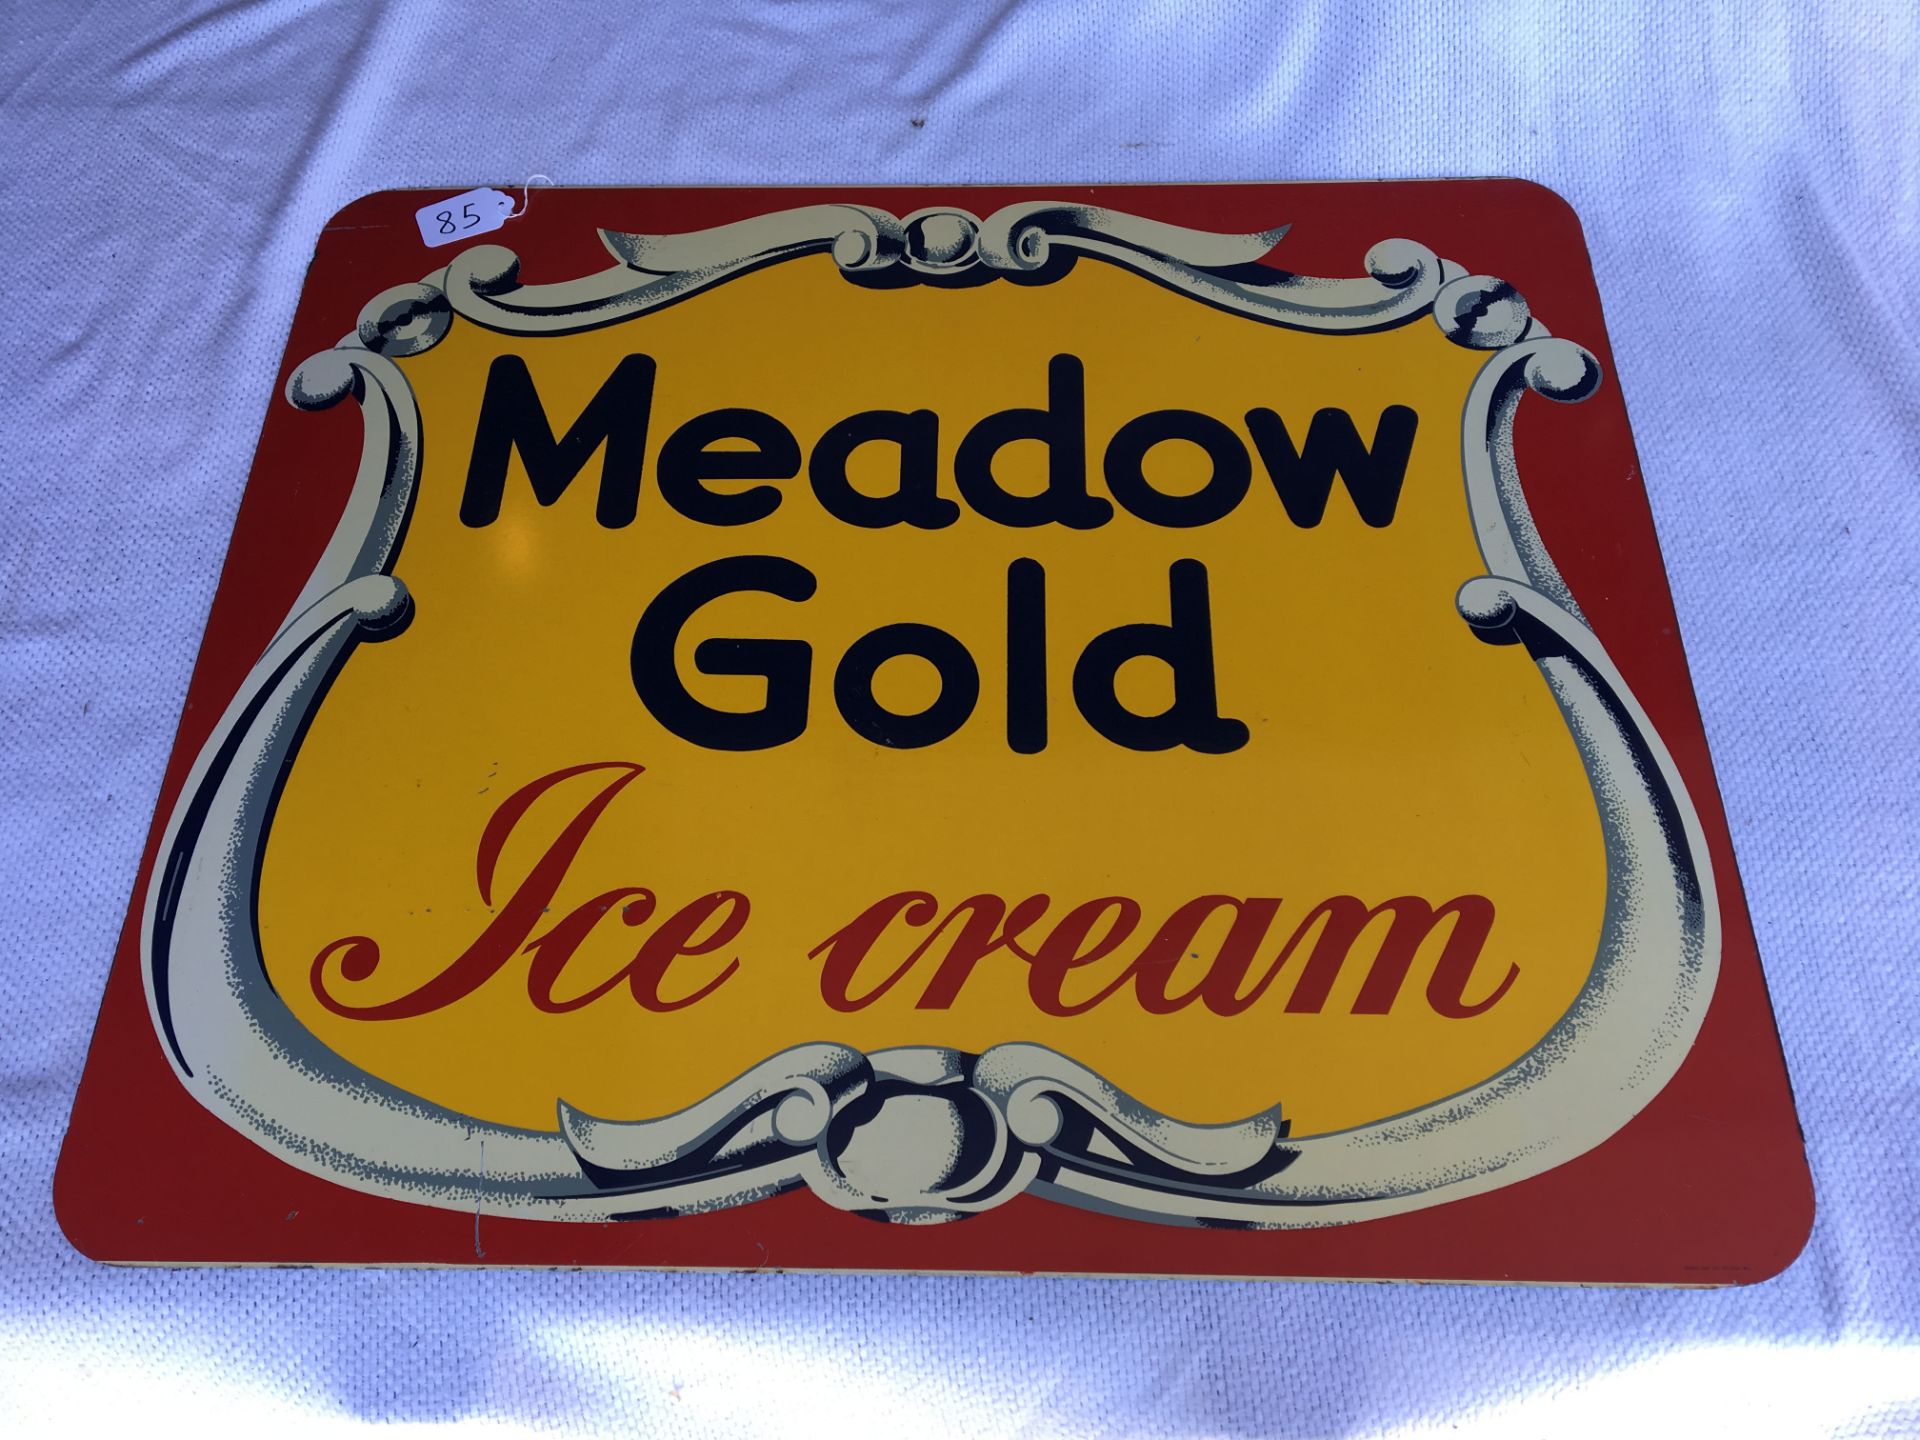 Meadow Gold Ice Cream, 30” x 35”, Stout Sign Company